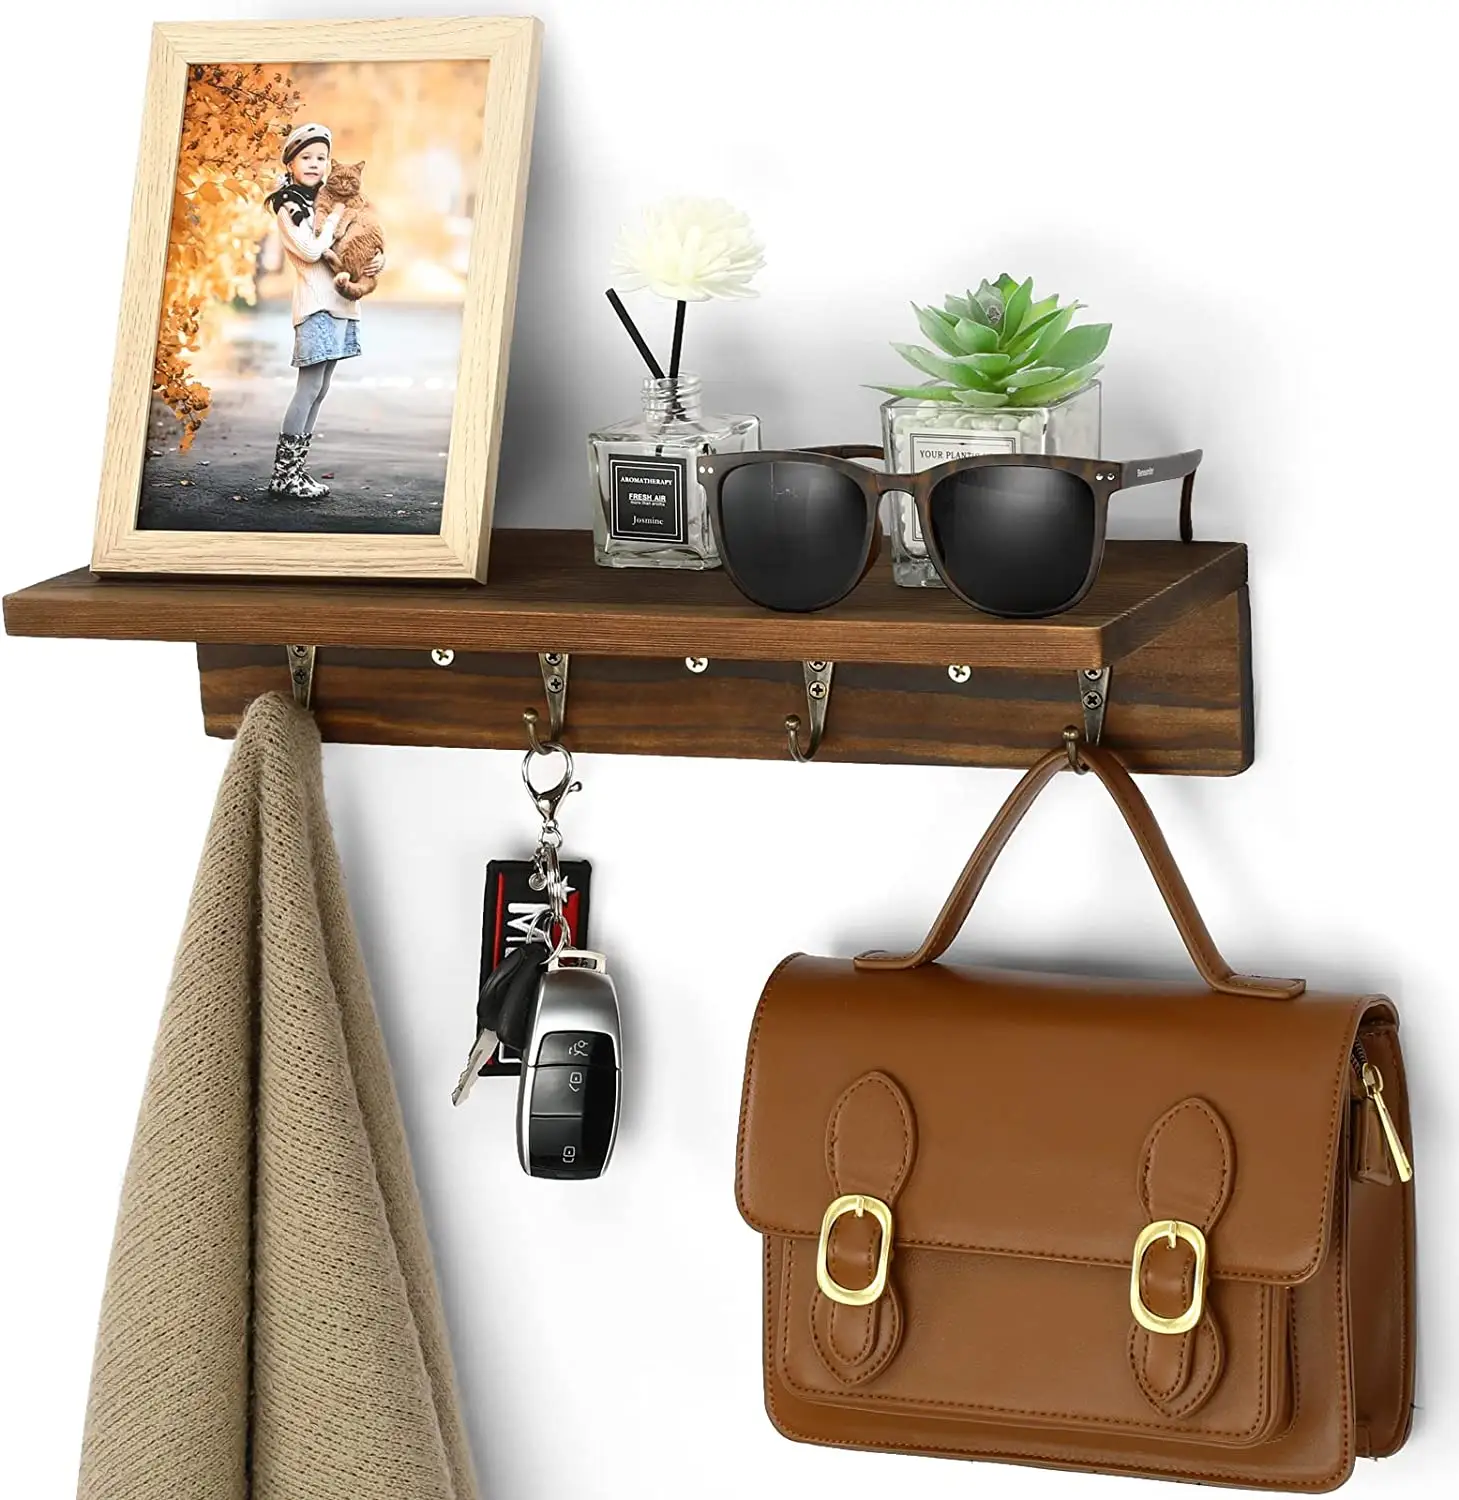 Wood Coat Rack Wall Mount with Shelf with 4 Vintage Metal Hooks and Upper Shelf for Storage